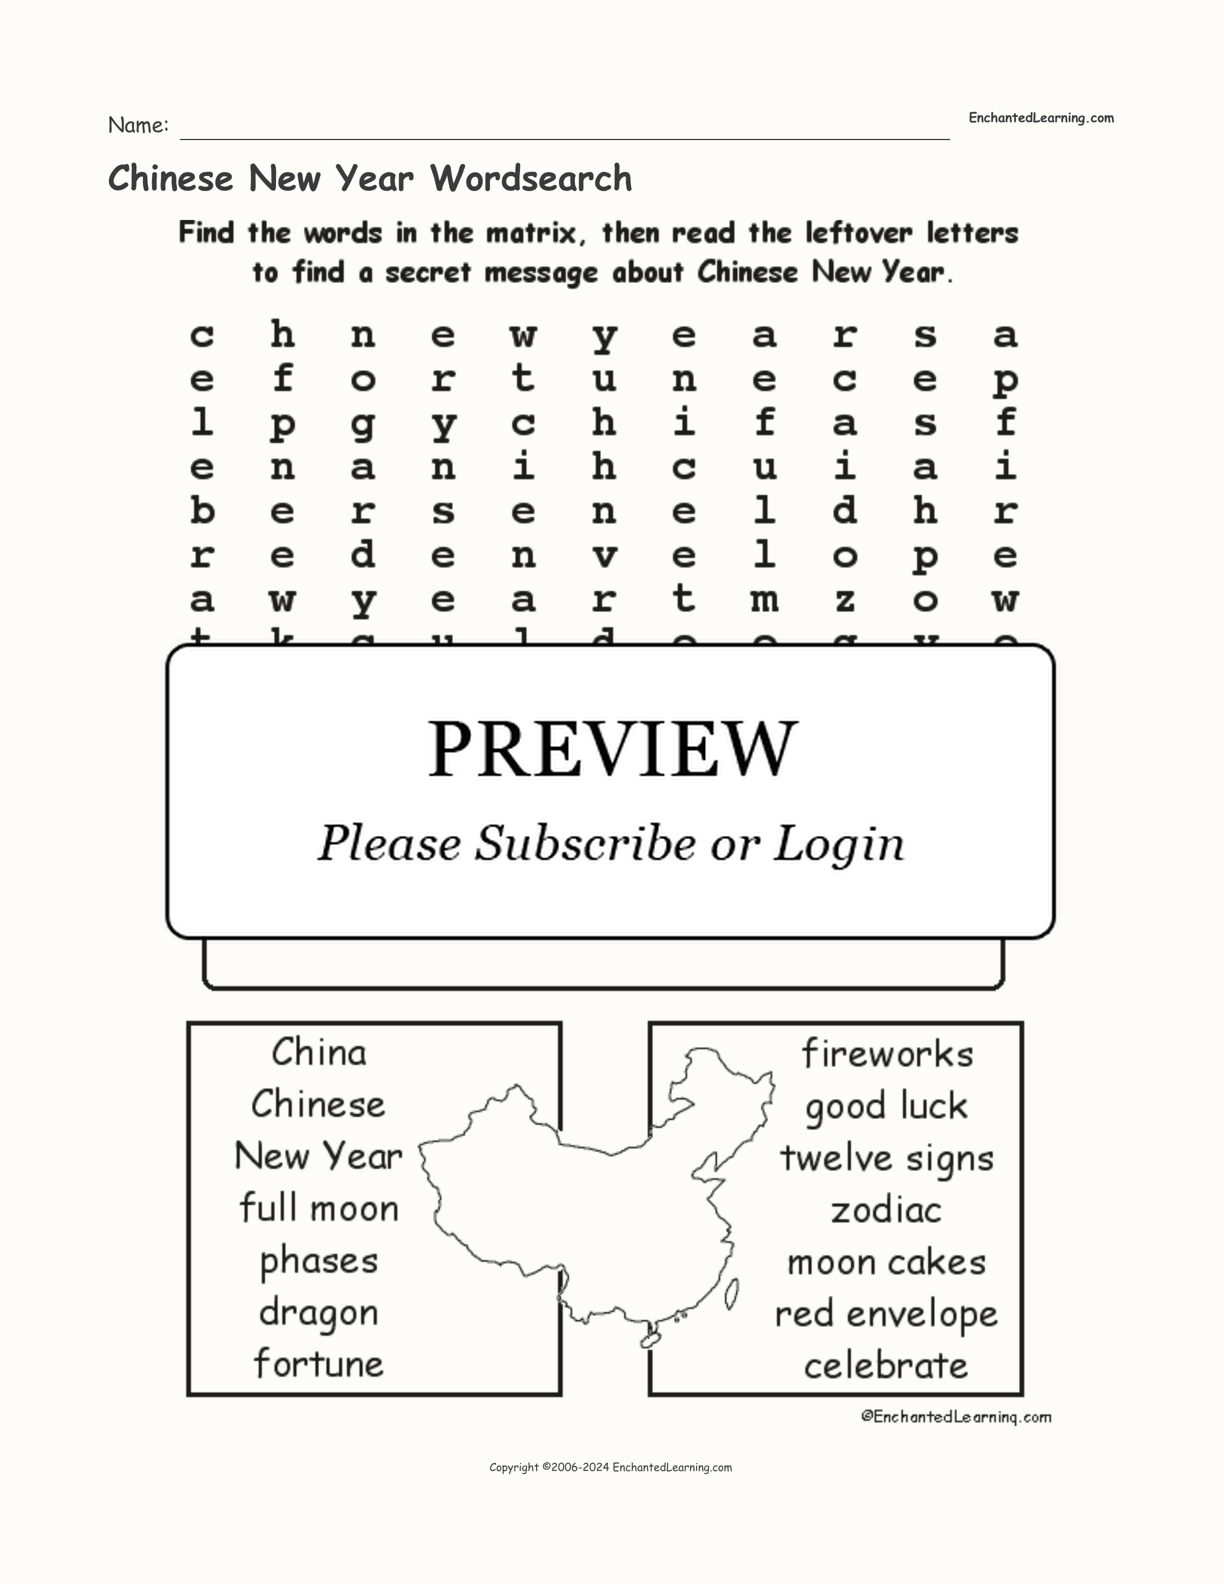 Chinese New Year Wordsearch interactive worksheet page 1